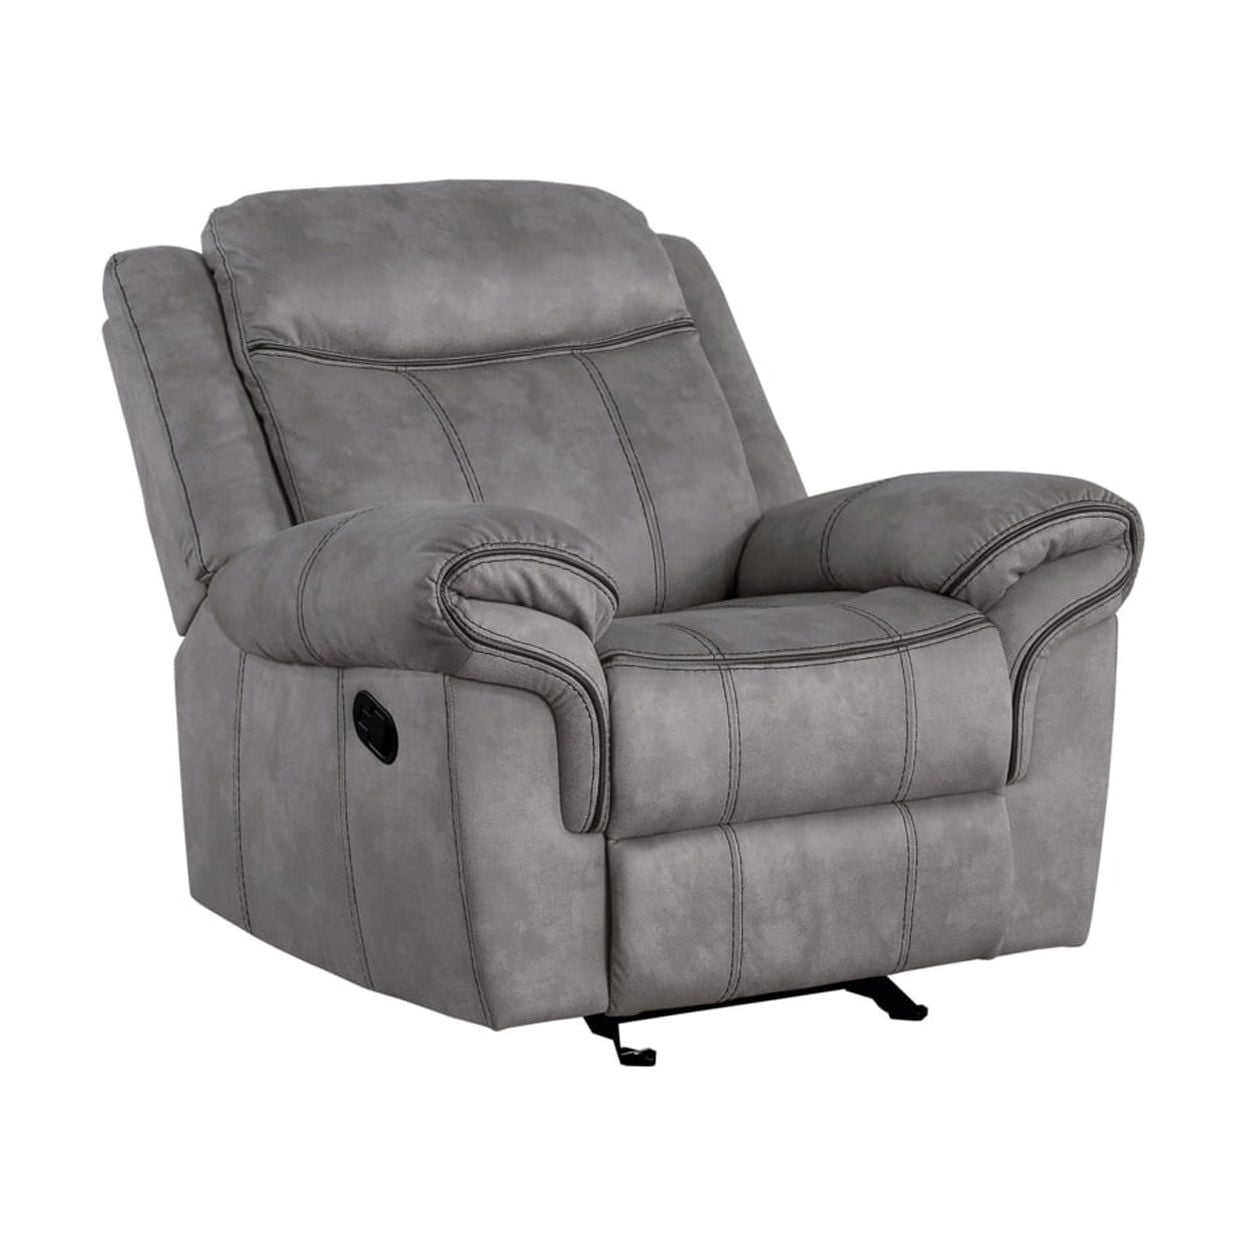 Picture of Benjara BM218582 Fabric Upholstered Metal Reclining Club Chair with Center Console, Gray - 41 x 39 x 42 in.